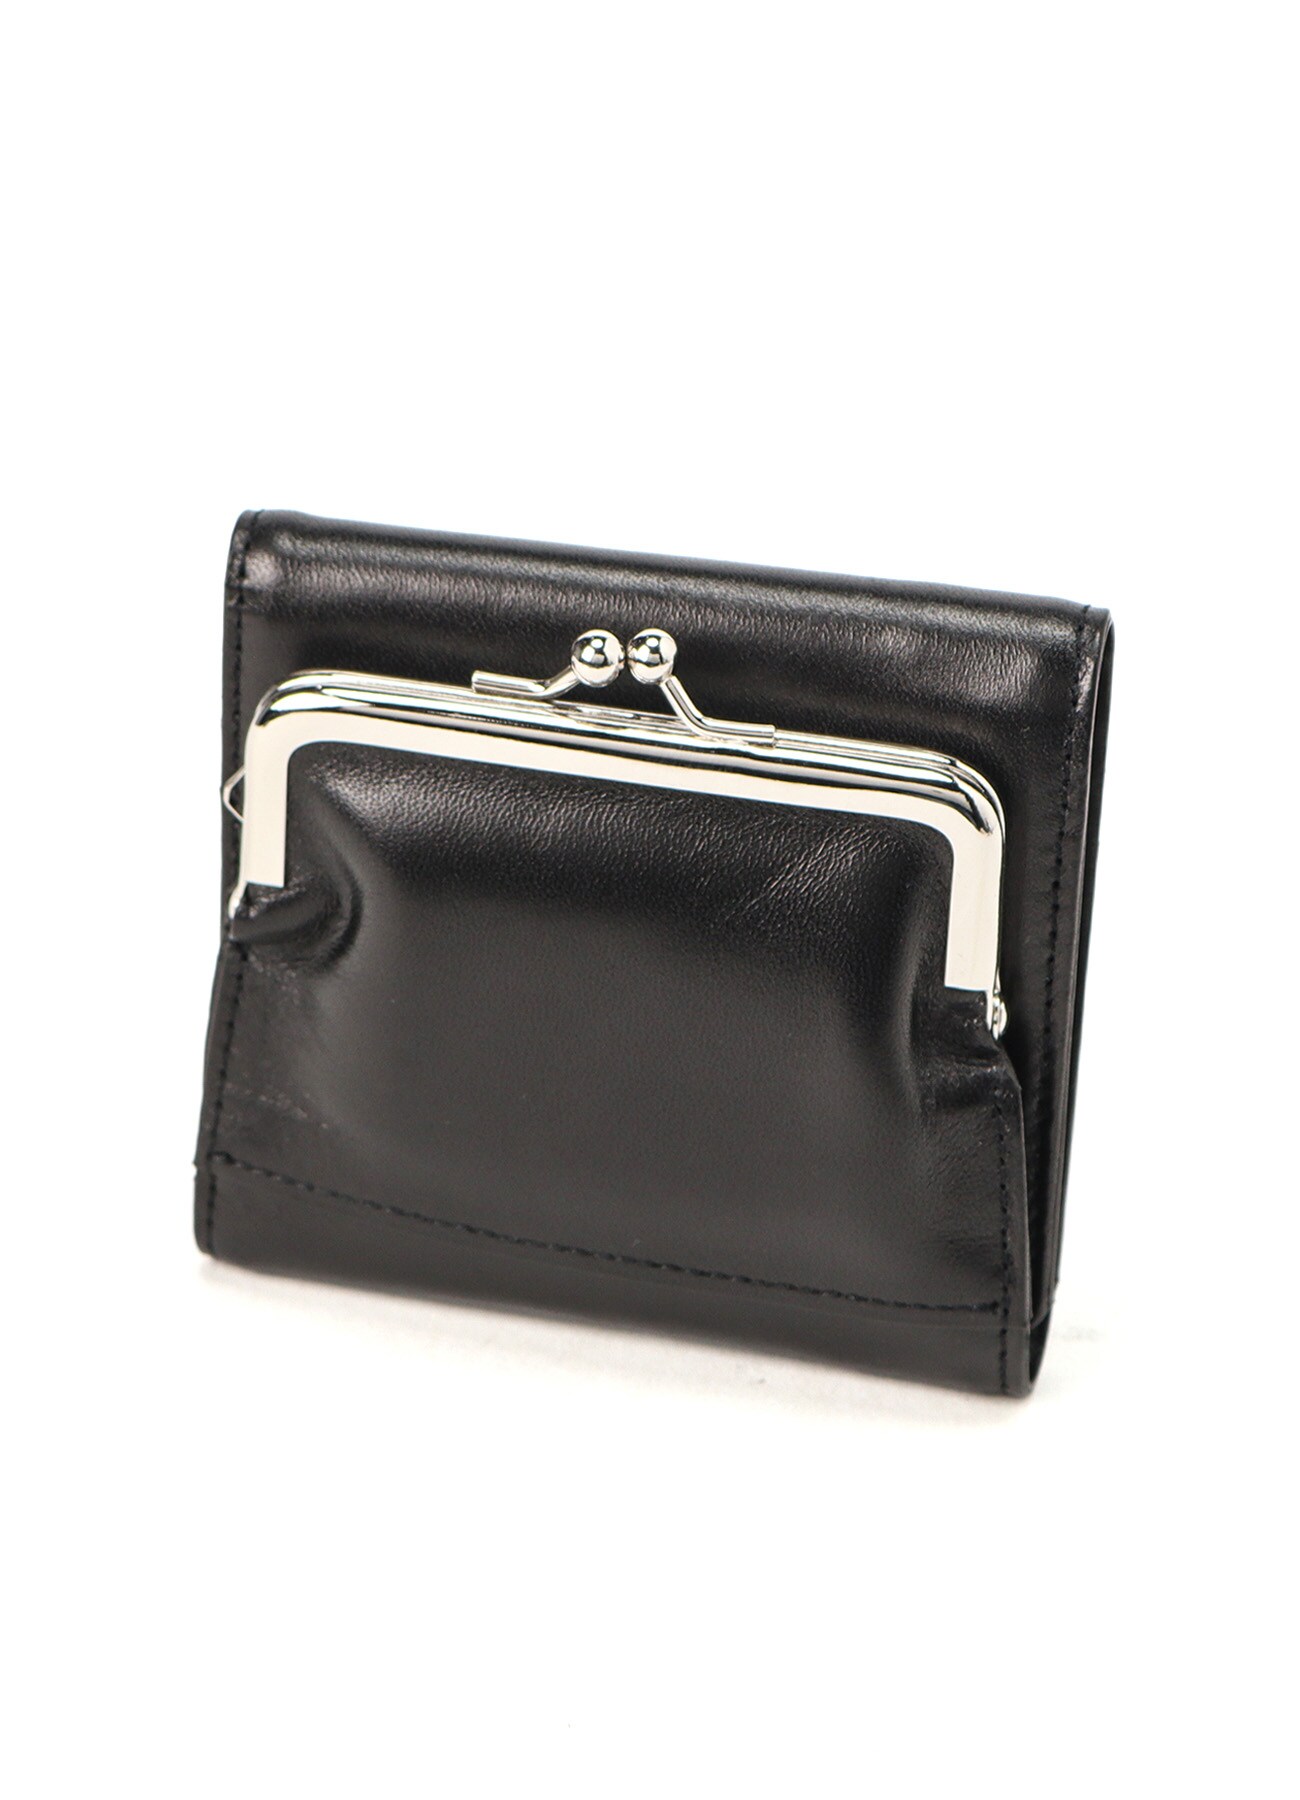 【7/26 12:00(JTS) Release】SEMI-GLOSS SMOOTH LEATHER MINI FOLDING WALLET